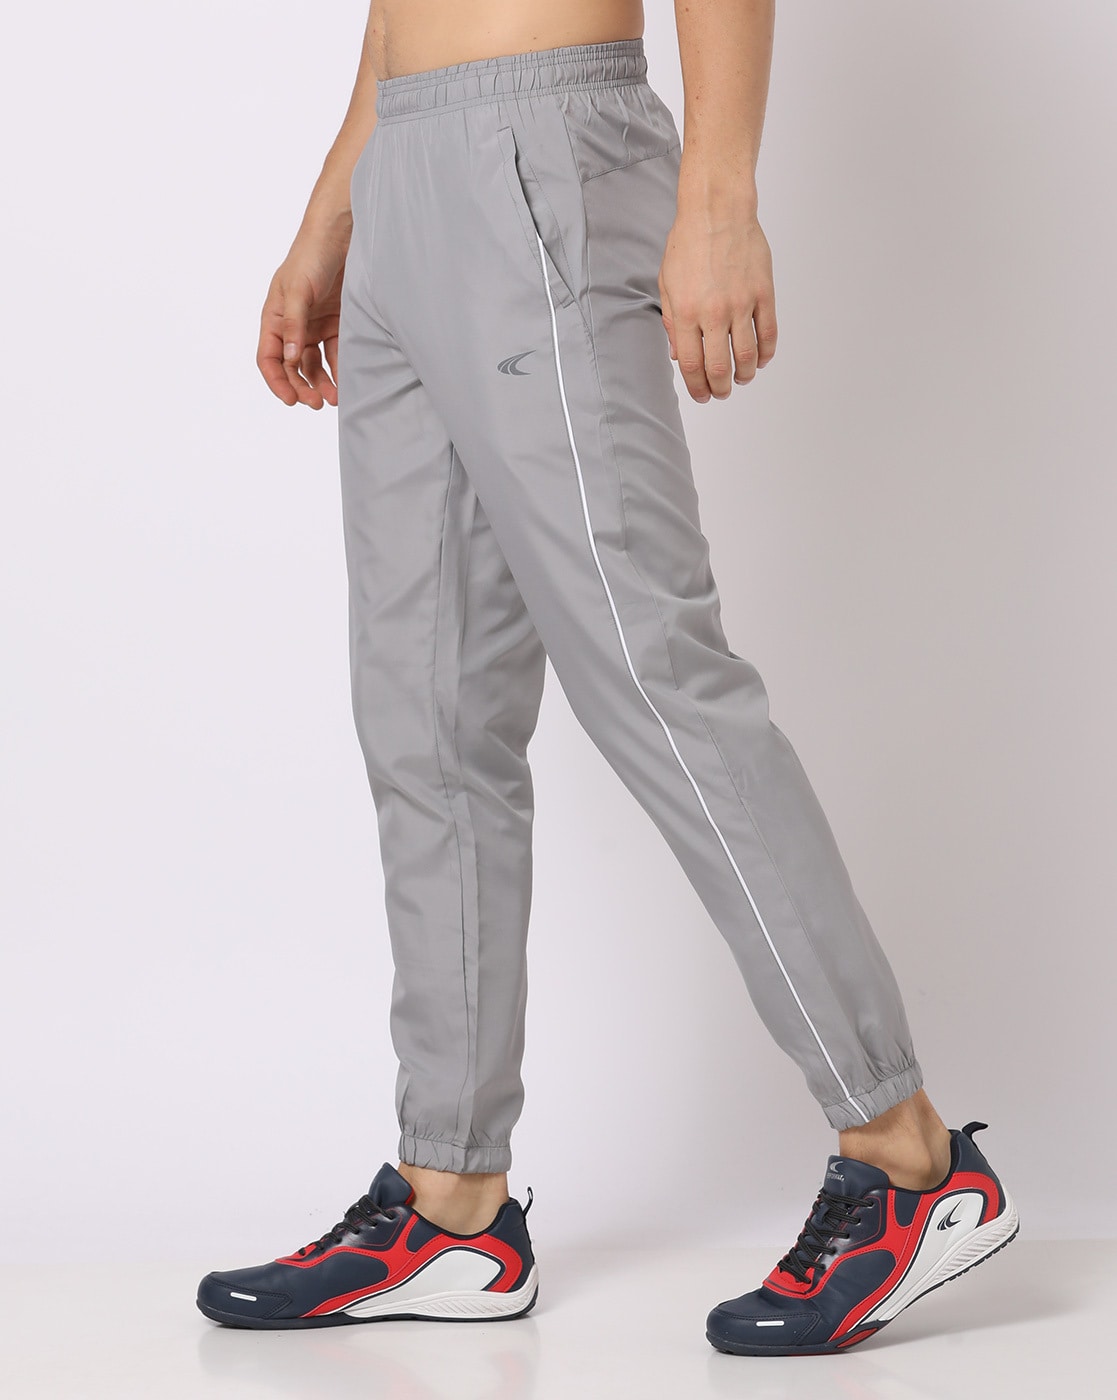 ZIA TEX Men's Slim Fit Polyester Track Pant (combo-2-135  track_Multicolor_M) : Amazon.in: Clothing & Accessories